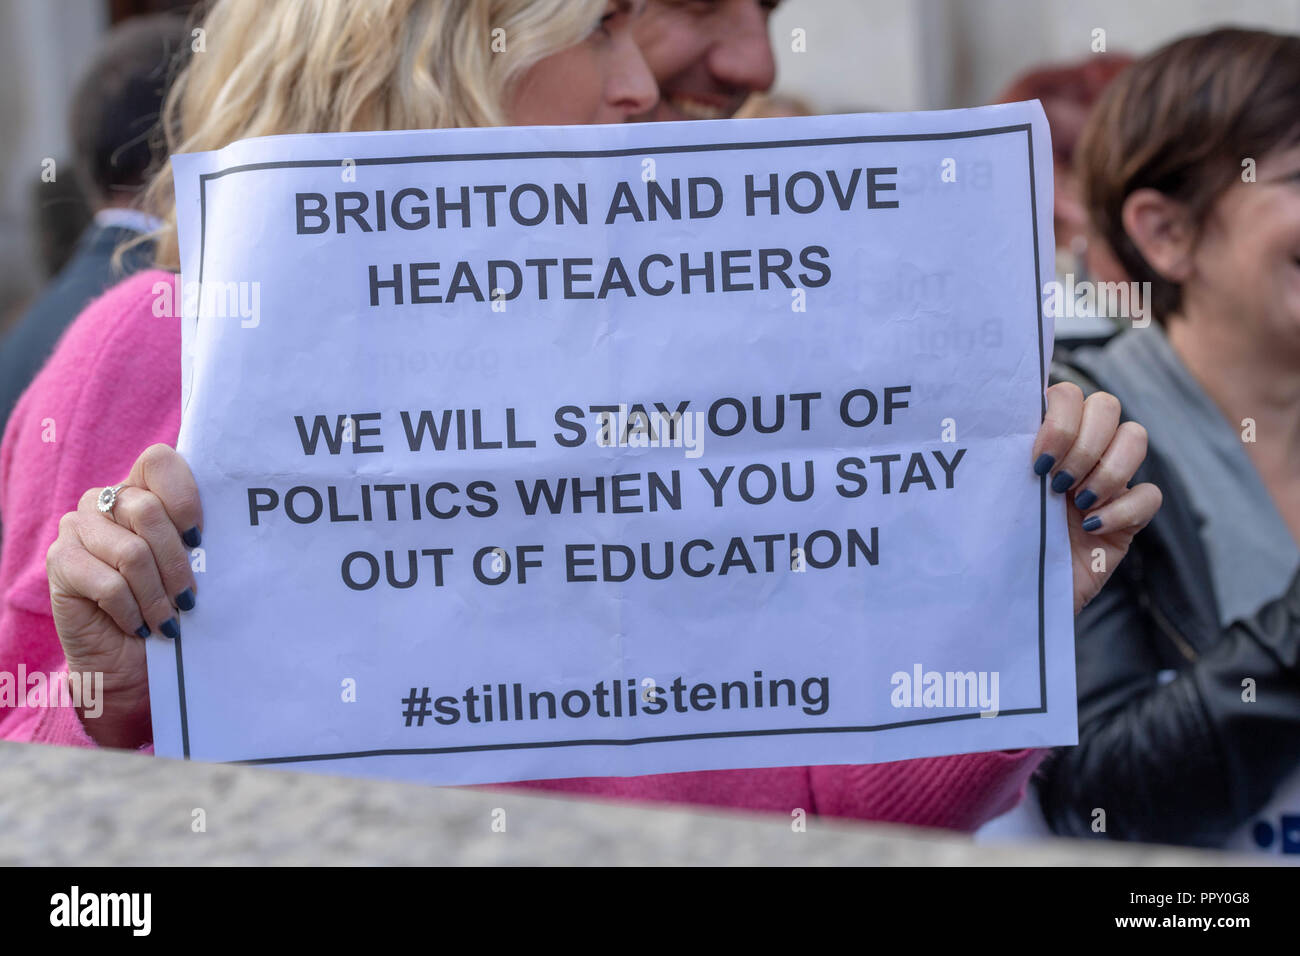 London 28th September 2018  Head Teachers rally in Westminster seeking an increase in educational funding.Hed teacher protester with banner #stillnotlistening  Credit Ian Davidson/Alamy Live News Stock Photo